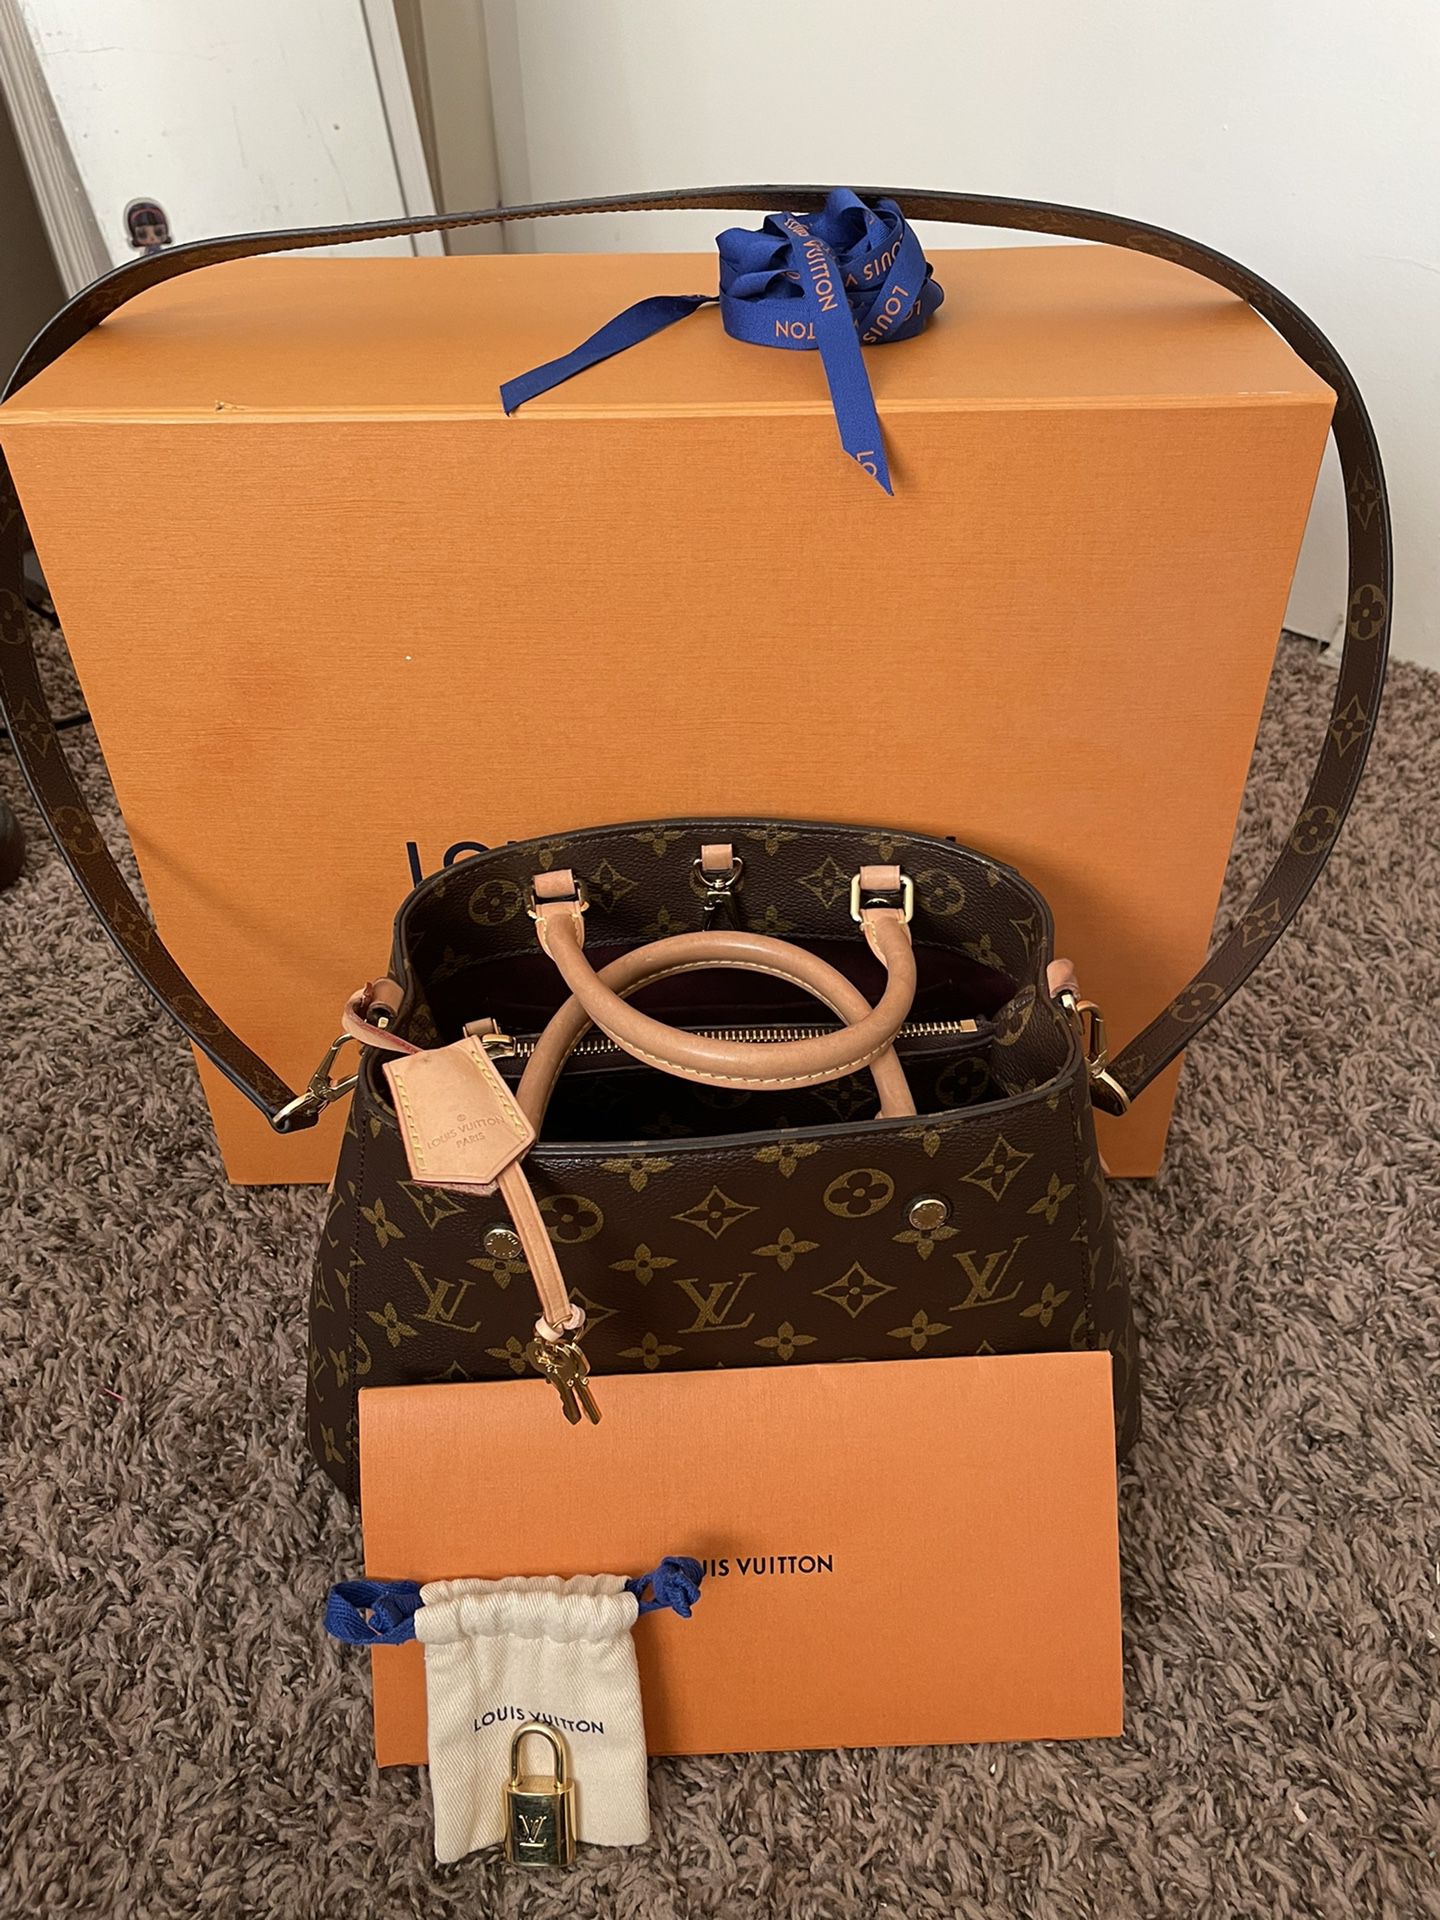 Louis Vuitton Neverfull MM for Sale in Scottsdale, AZ - OfferUp